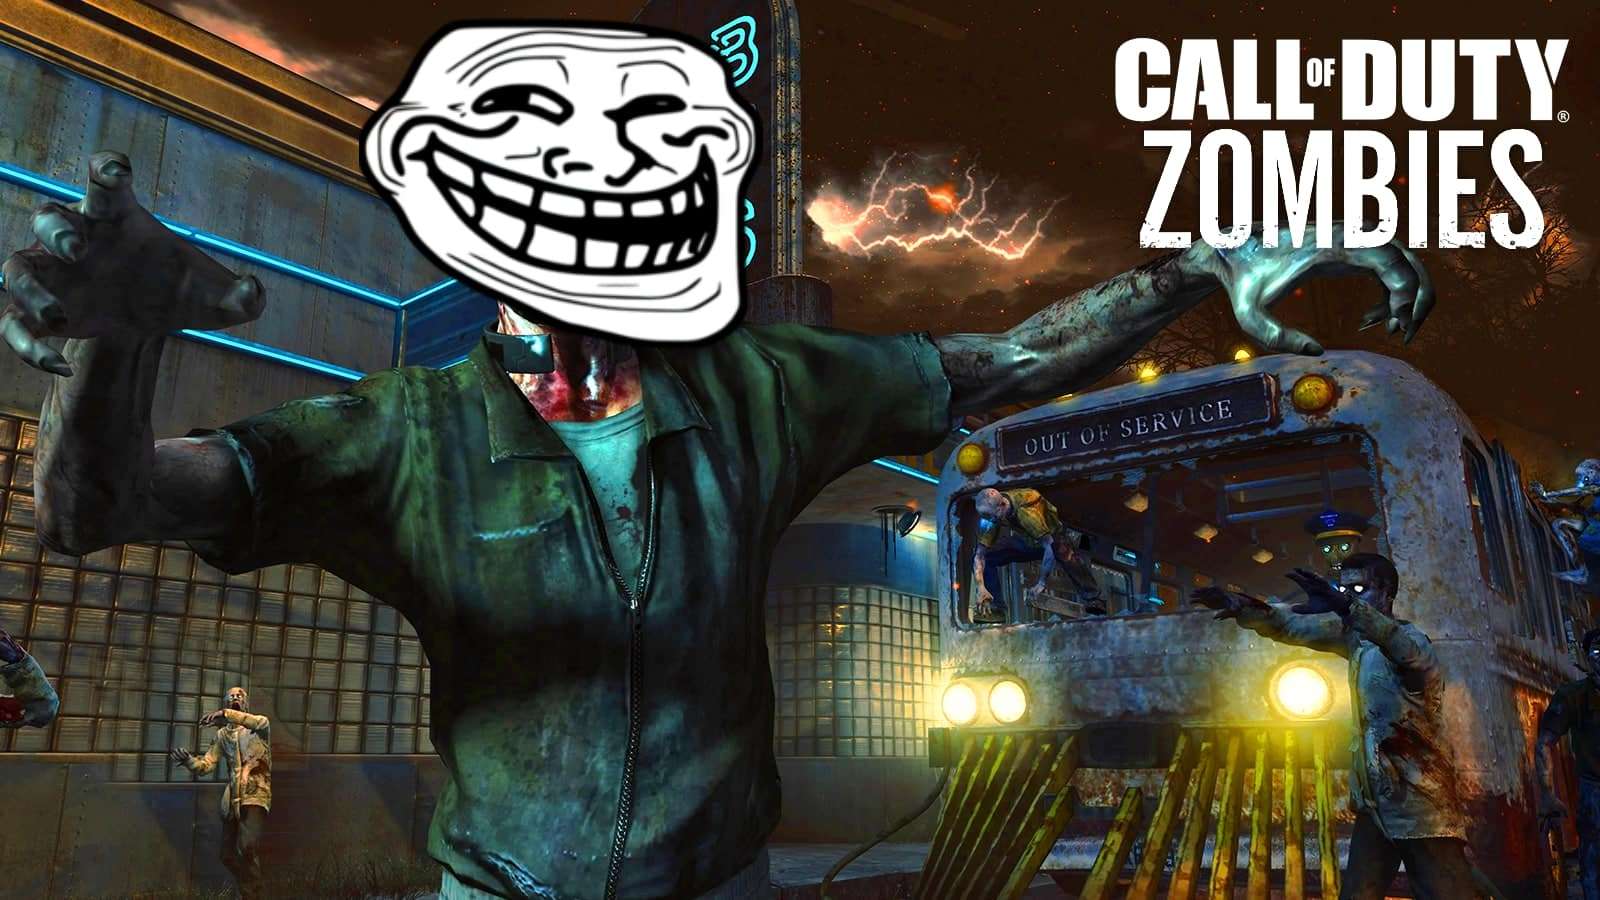 CoD Zombies devs accidentally trolled themselves and the community loved it